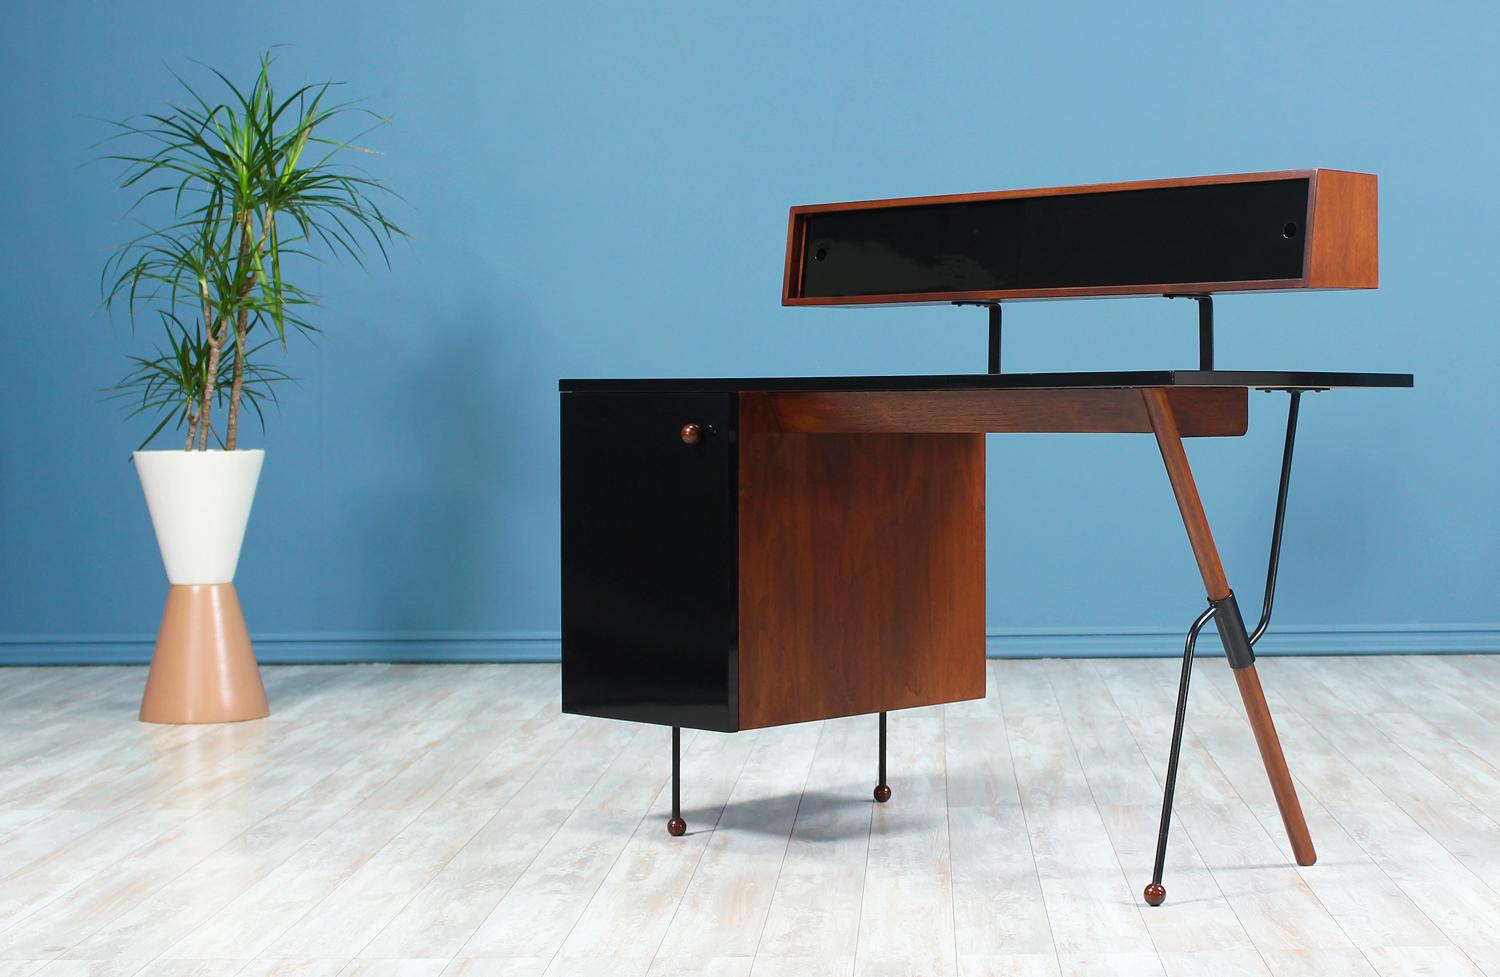 A fantastic Desk designed by Greta M. Grossman for Glenn of California in the United States in 1952. This beautiful desk features a walnut wood construction with a glossy black laminate coating which contrasts beautifully with the warm wood hue and